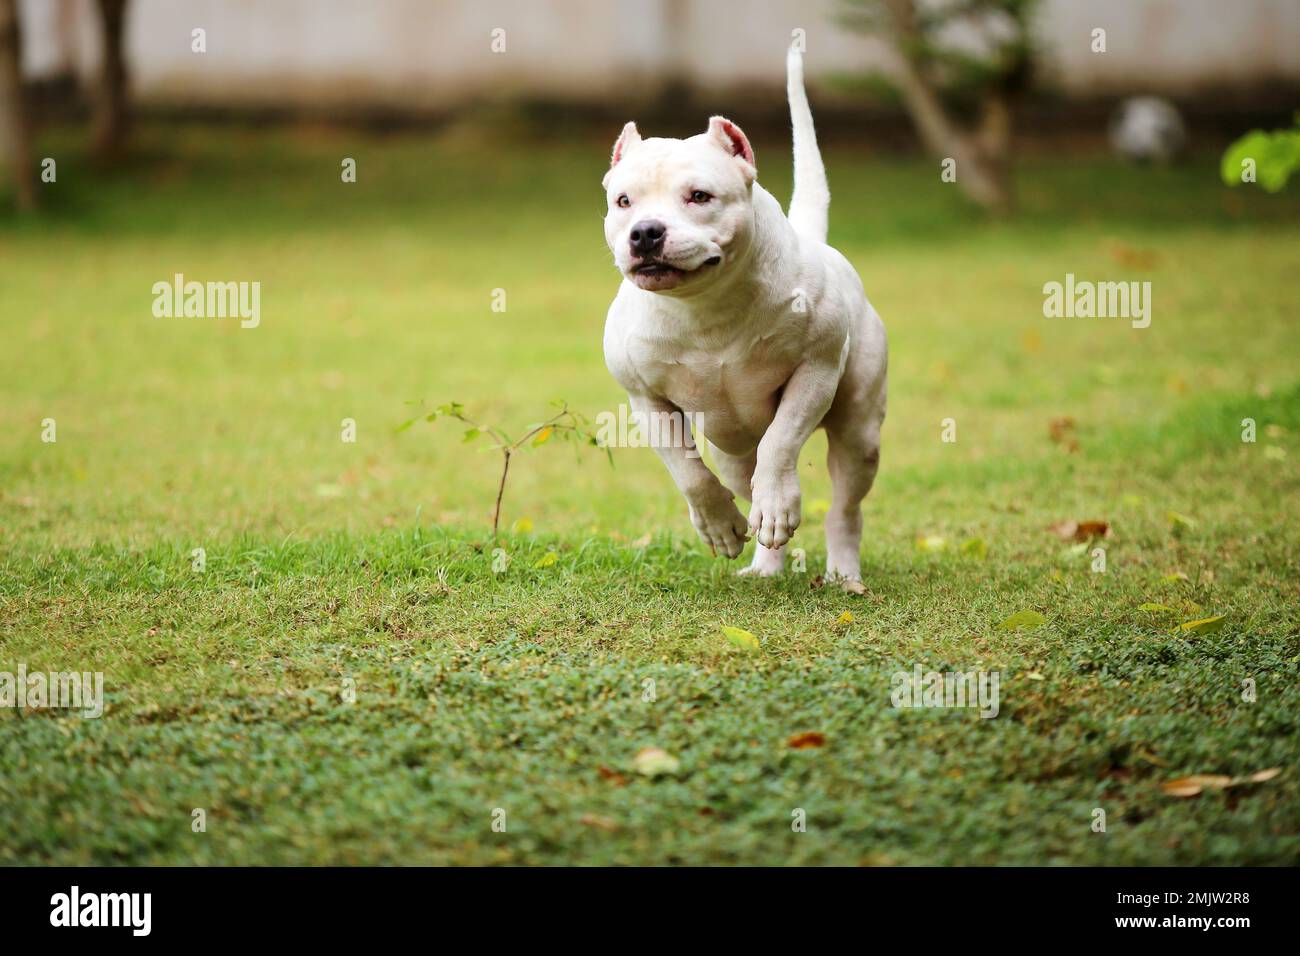 American Pitbull Terrier running at the park. Muscle dog unleashed in grass field. Stock Photo